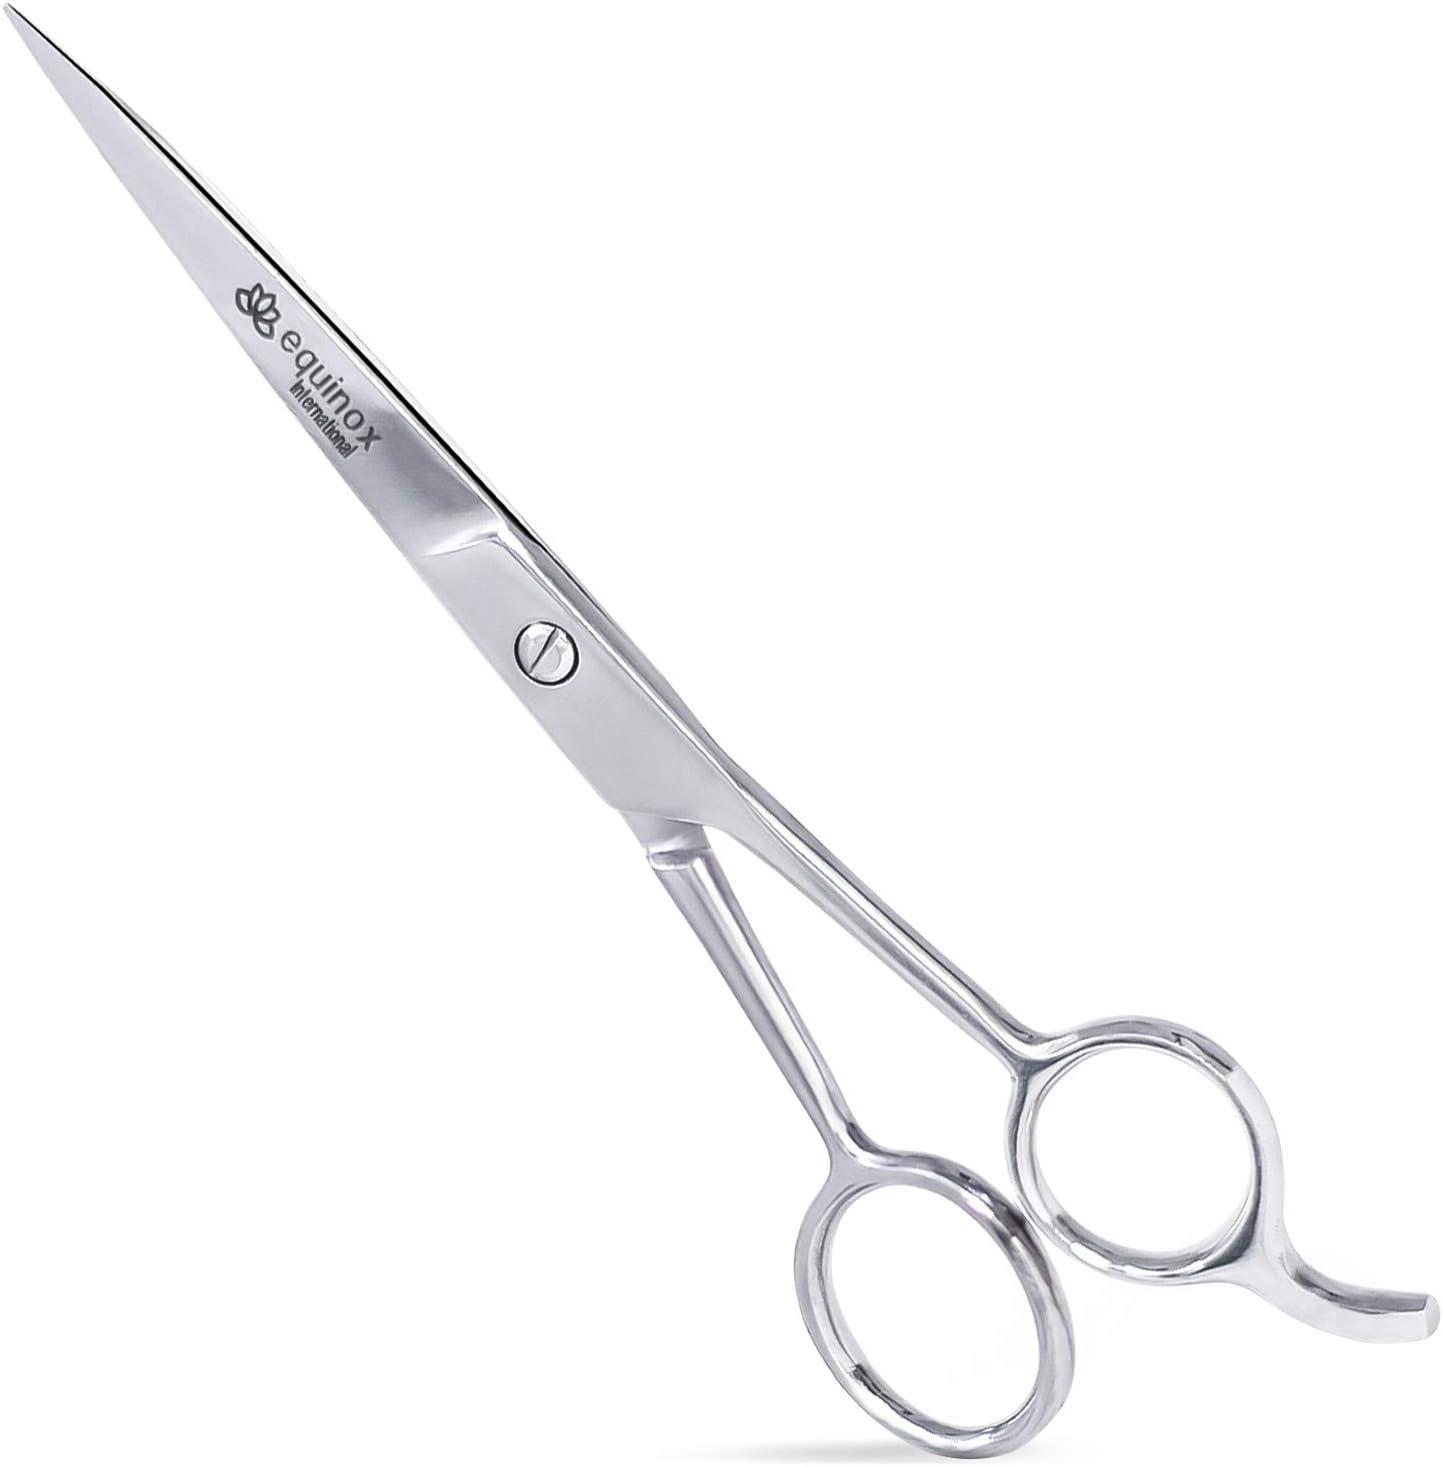 Hairdresser scissors - Serie 6 Collection - cm. 16,50 From Premax